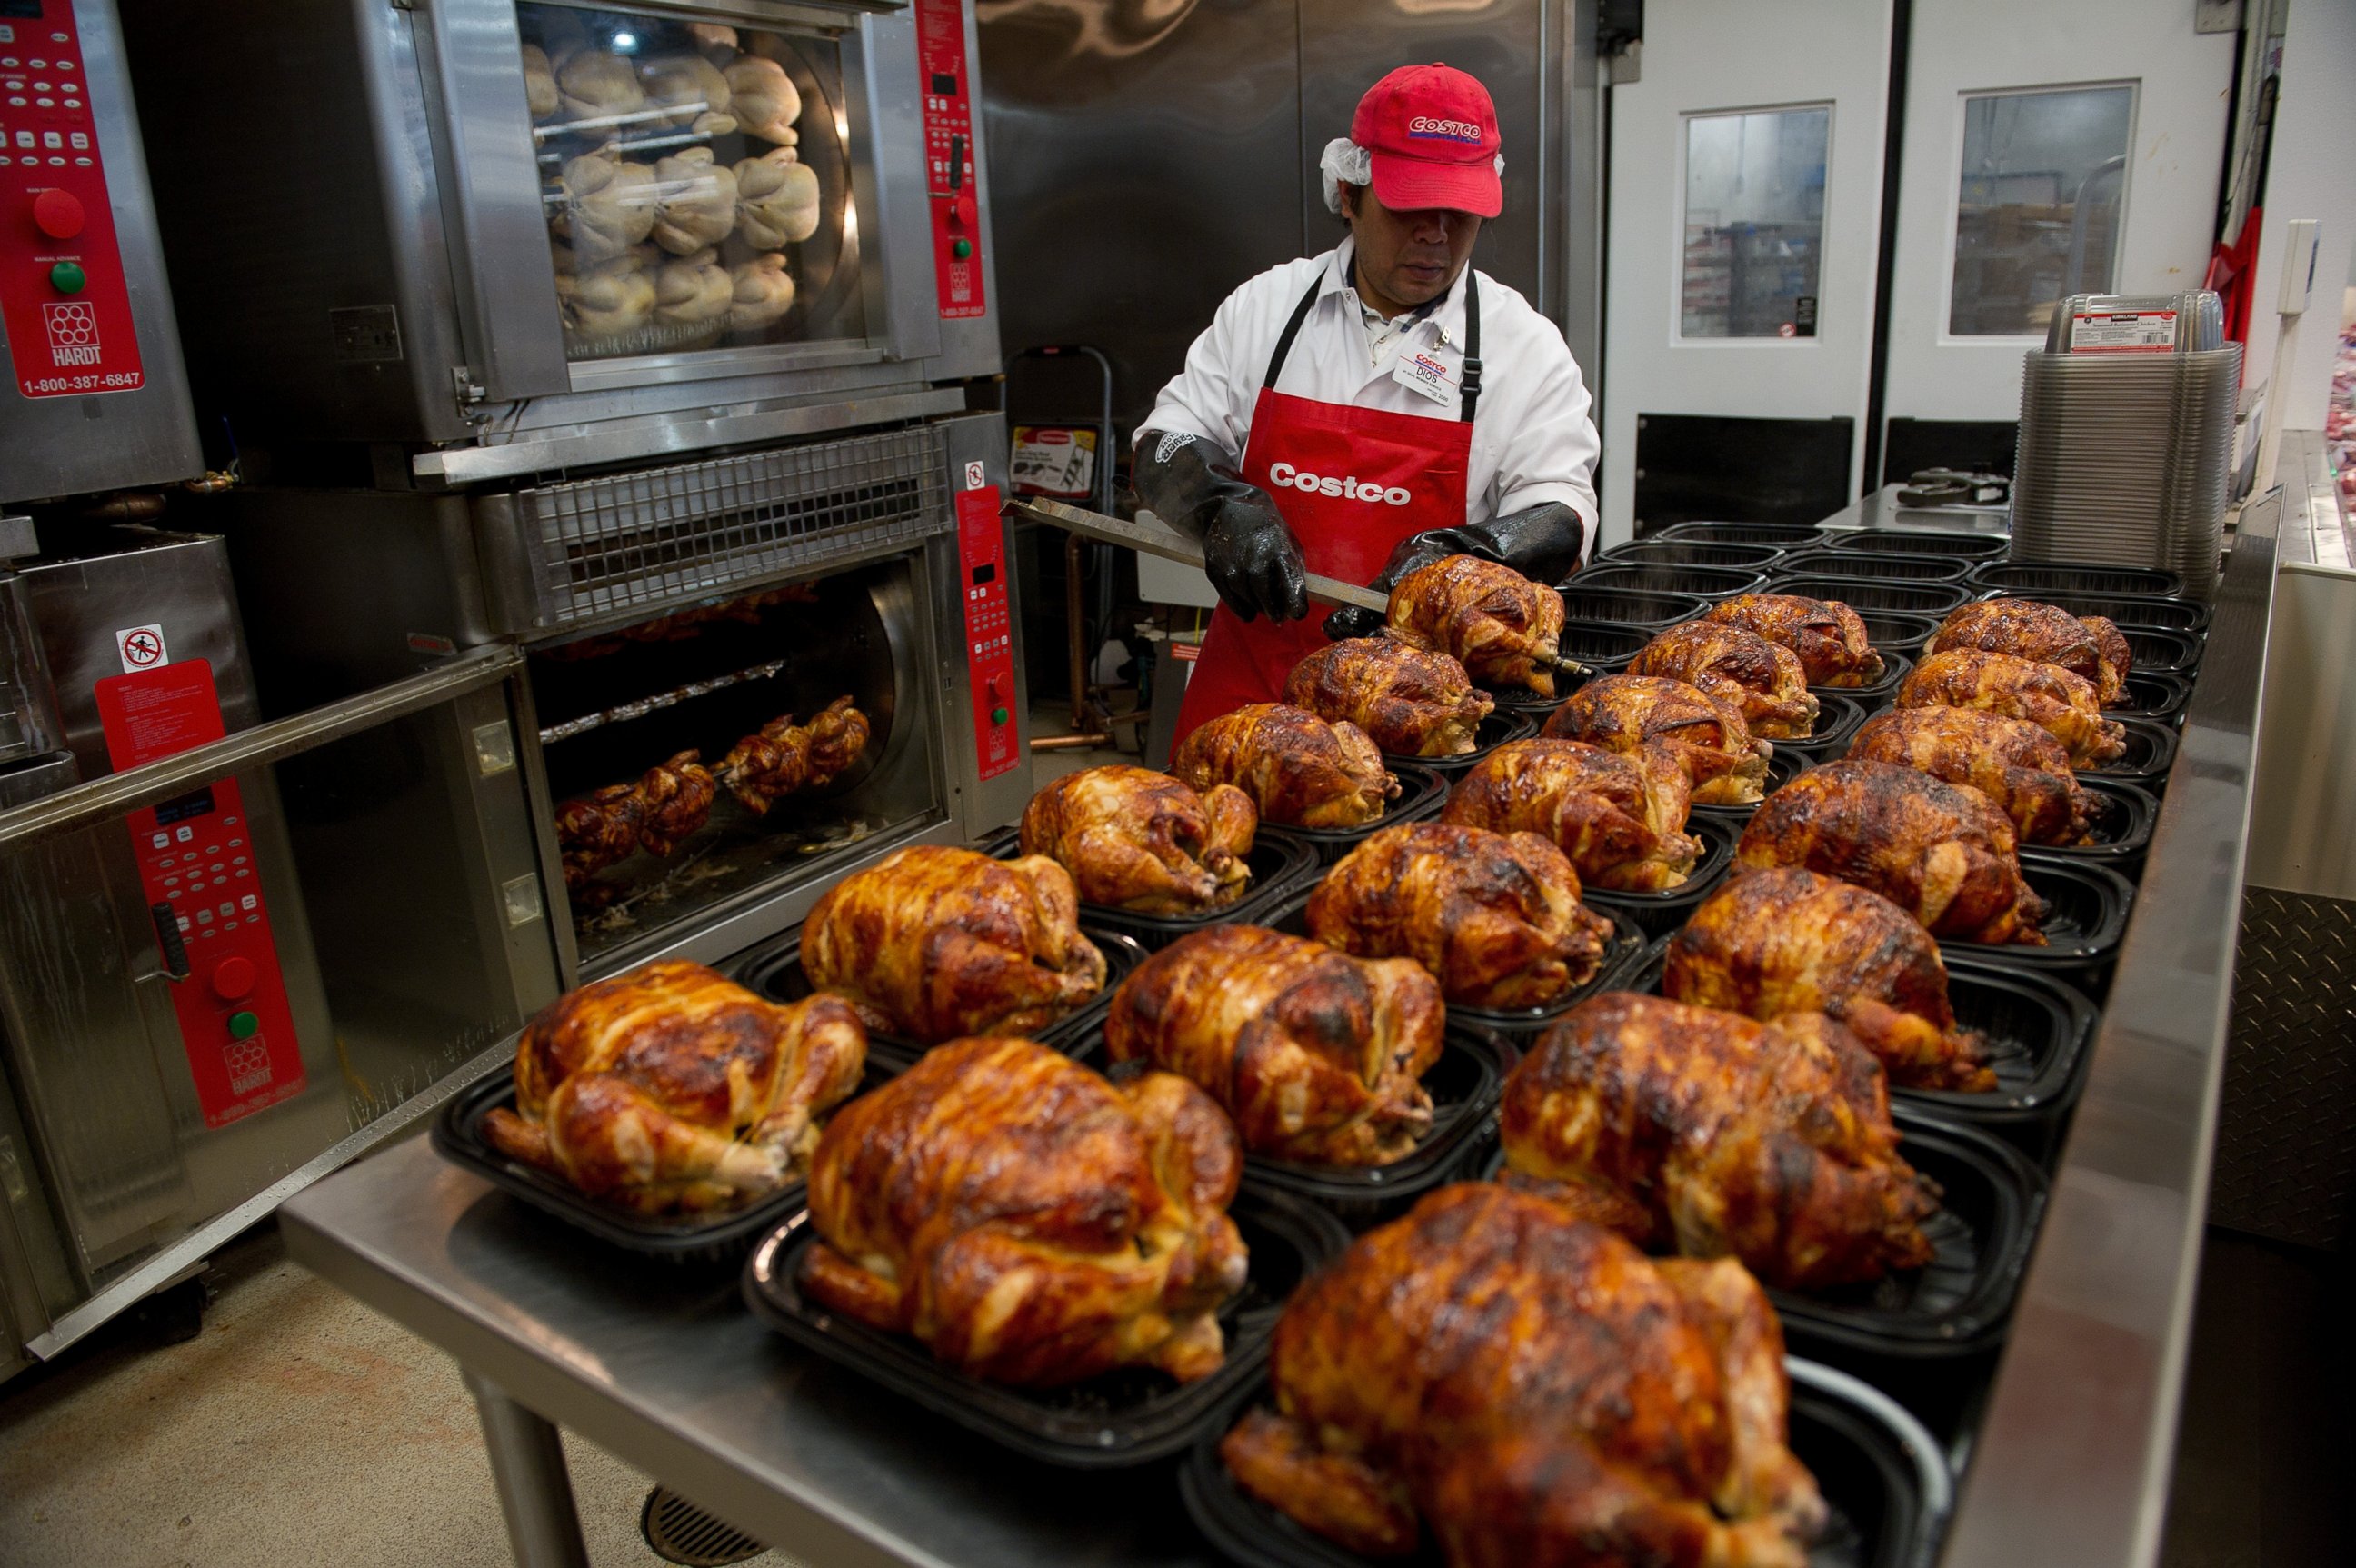 PHOTO: A service deli worker places cooked rotisserie chickens in containers at a Costco store in San Francisco, Calif. on Dec. 6, 2011.